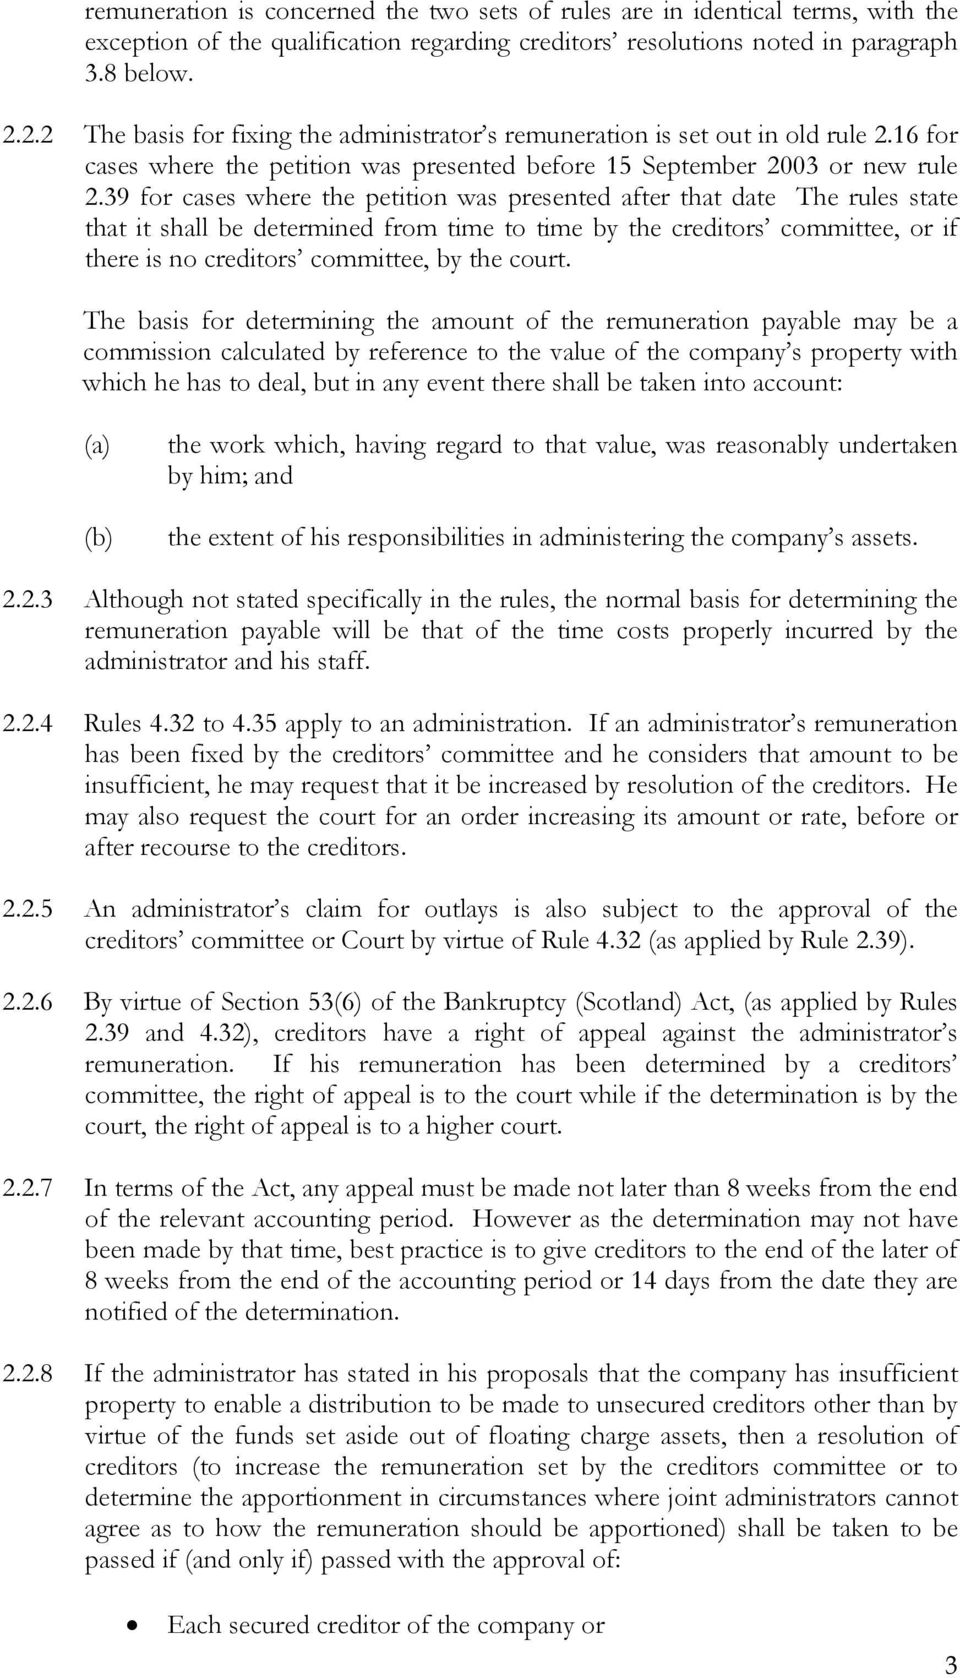 39 for cases where the petition was presented after that date The rules state that it shall be determined from time to time by the creditors committee, or if there is no creditors committee, by the